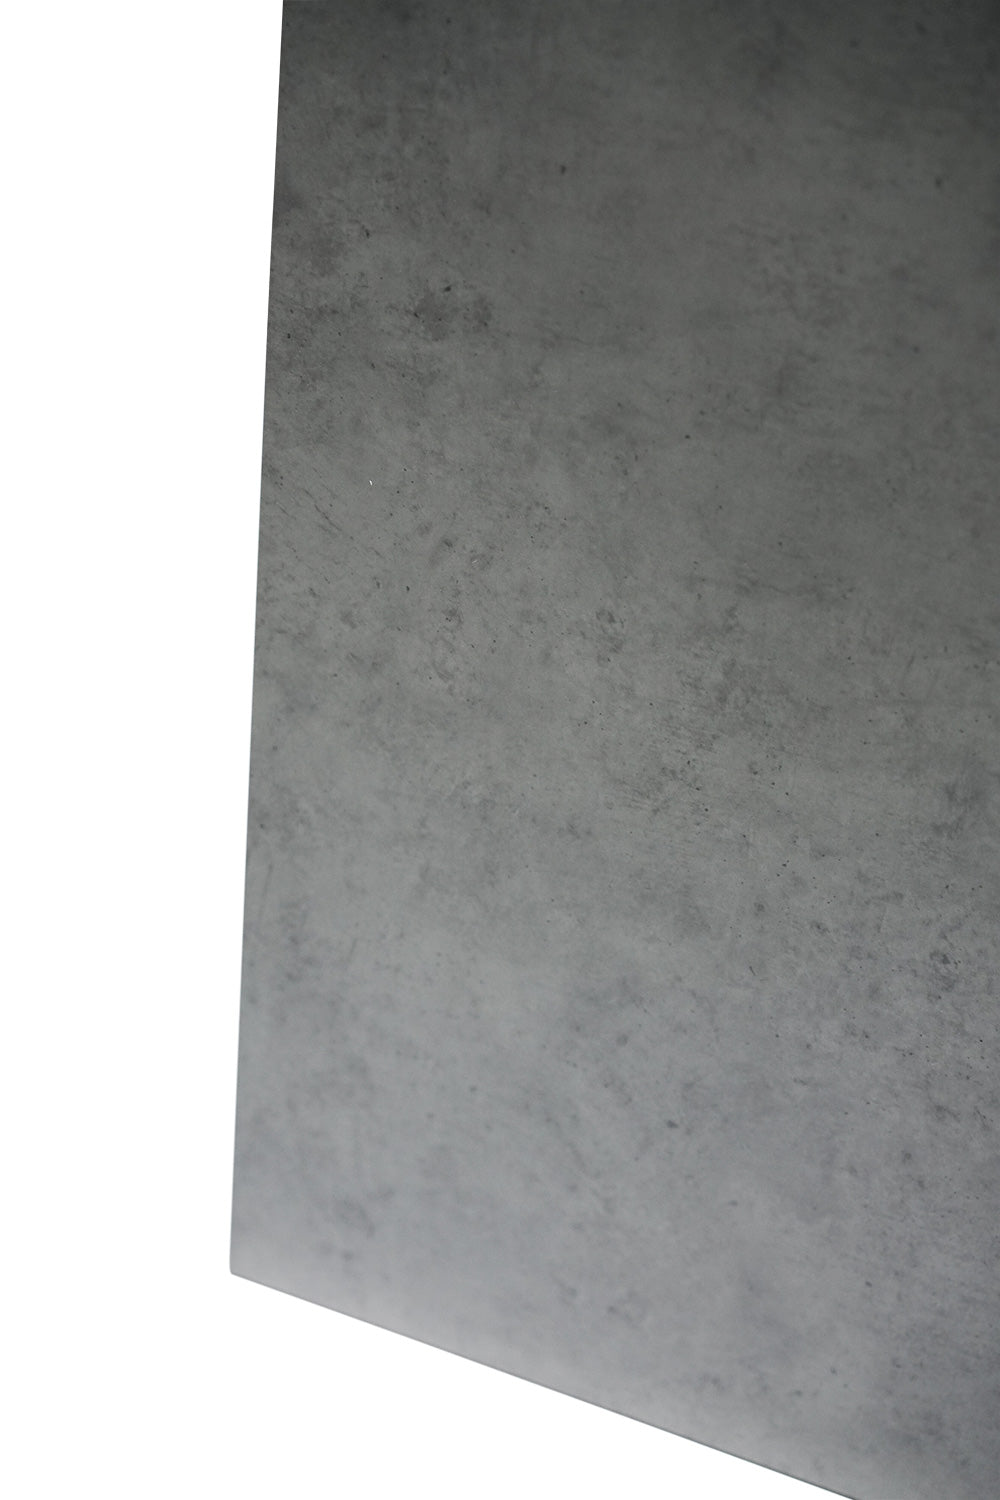 Solid Core Laminate Table Top - Cement